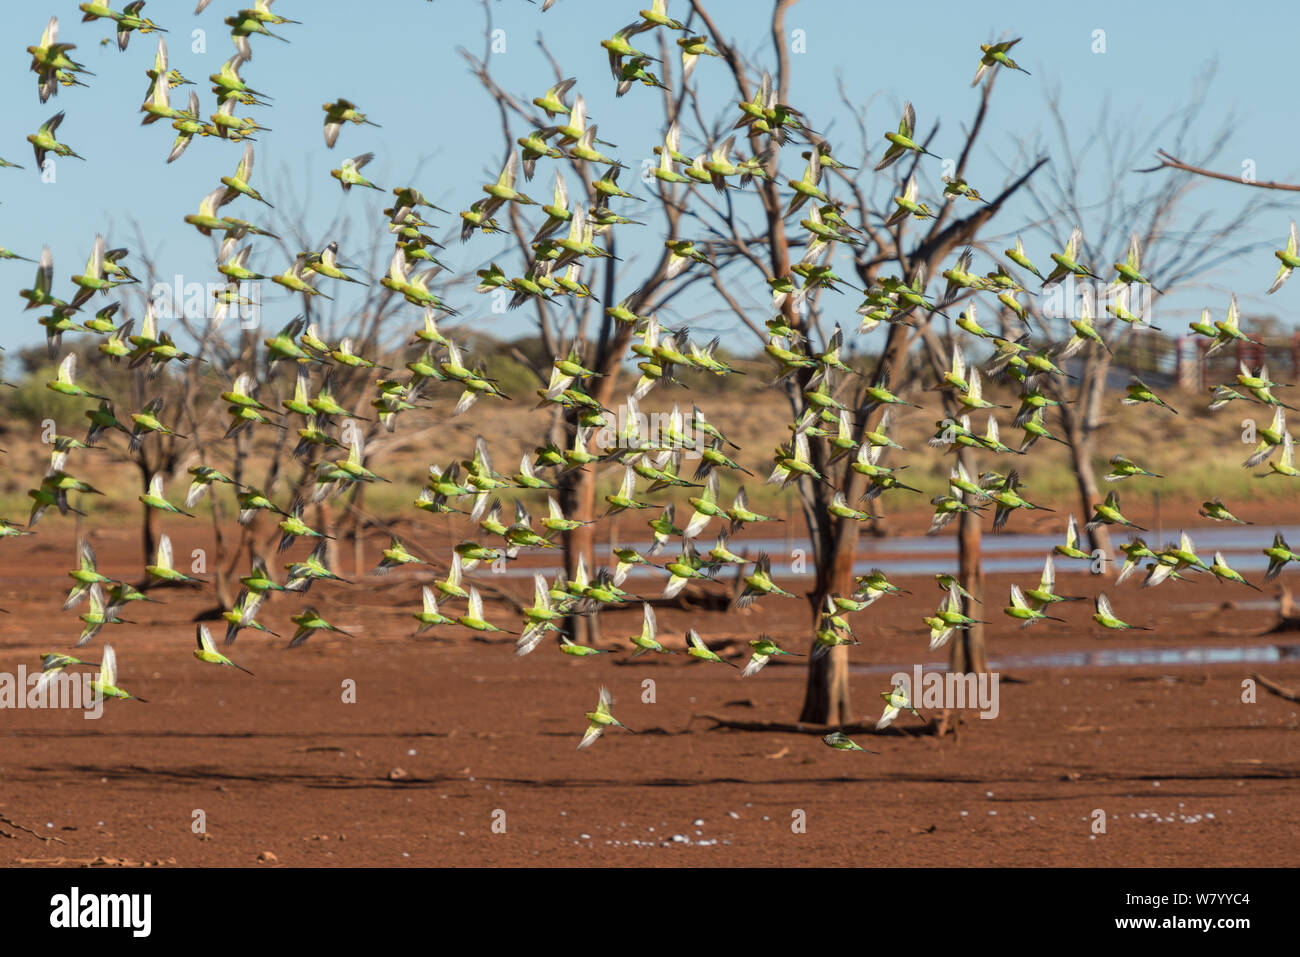 Flock of Budgerigars (Melopsittacus undulatus) in flight by outback dam, Northern Territory, Australia. Stock Photo